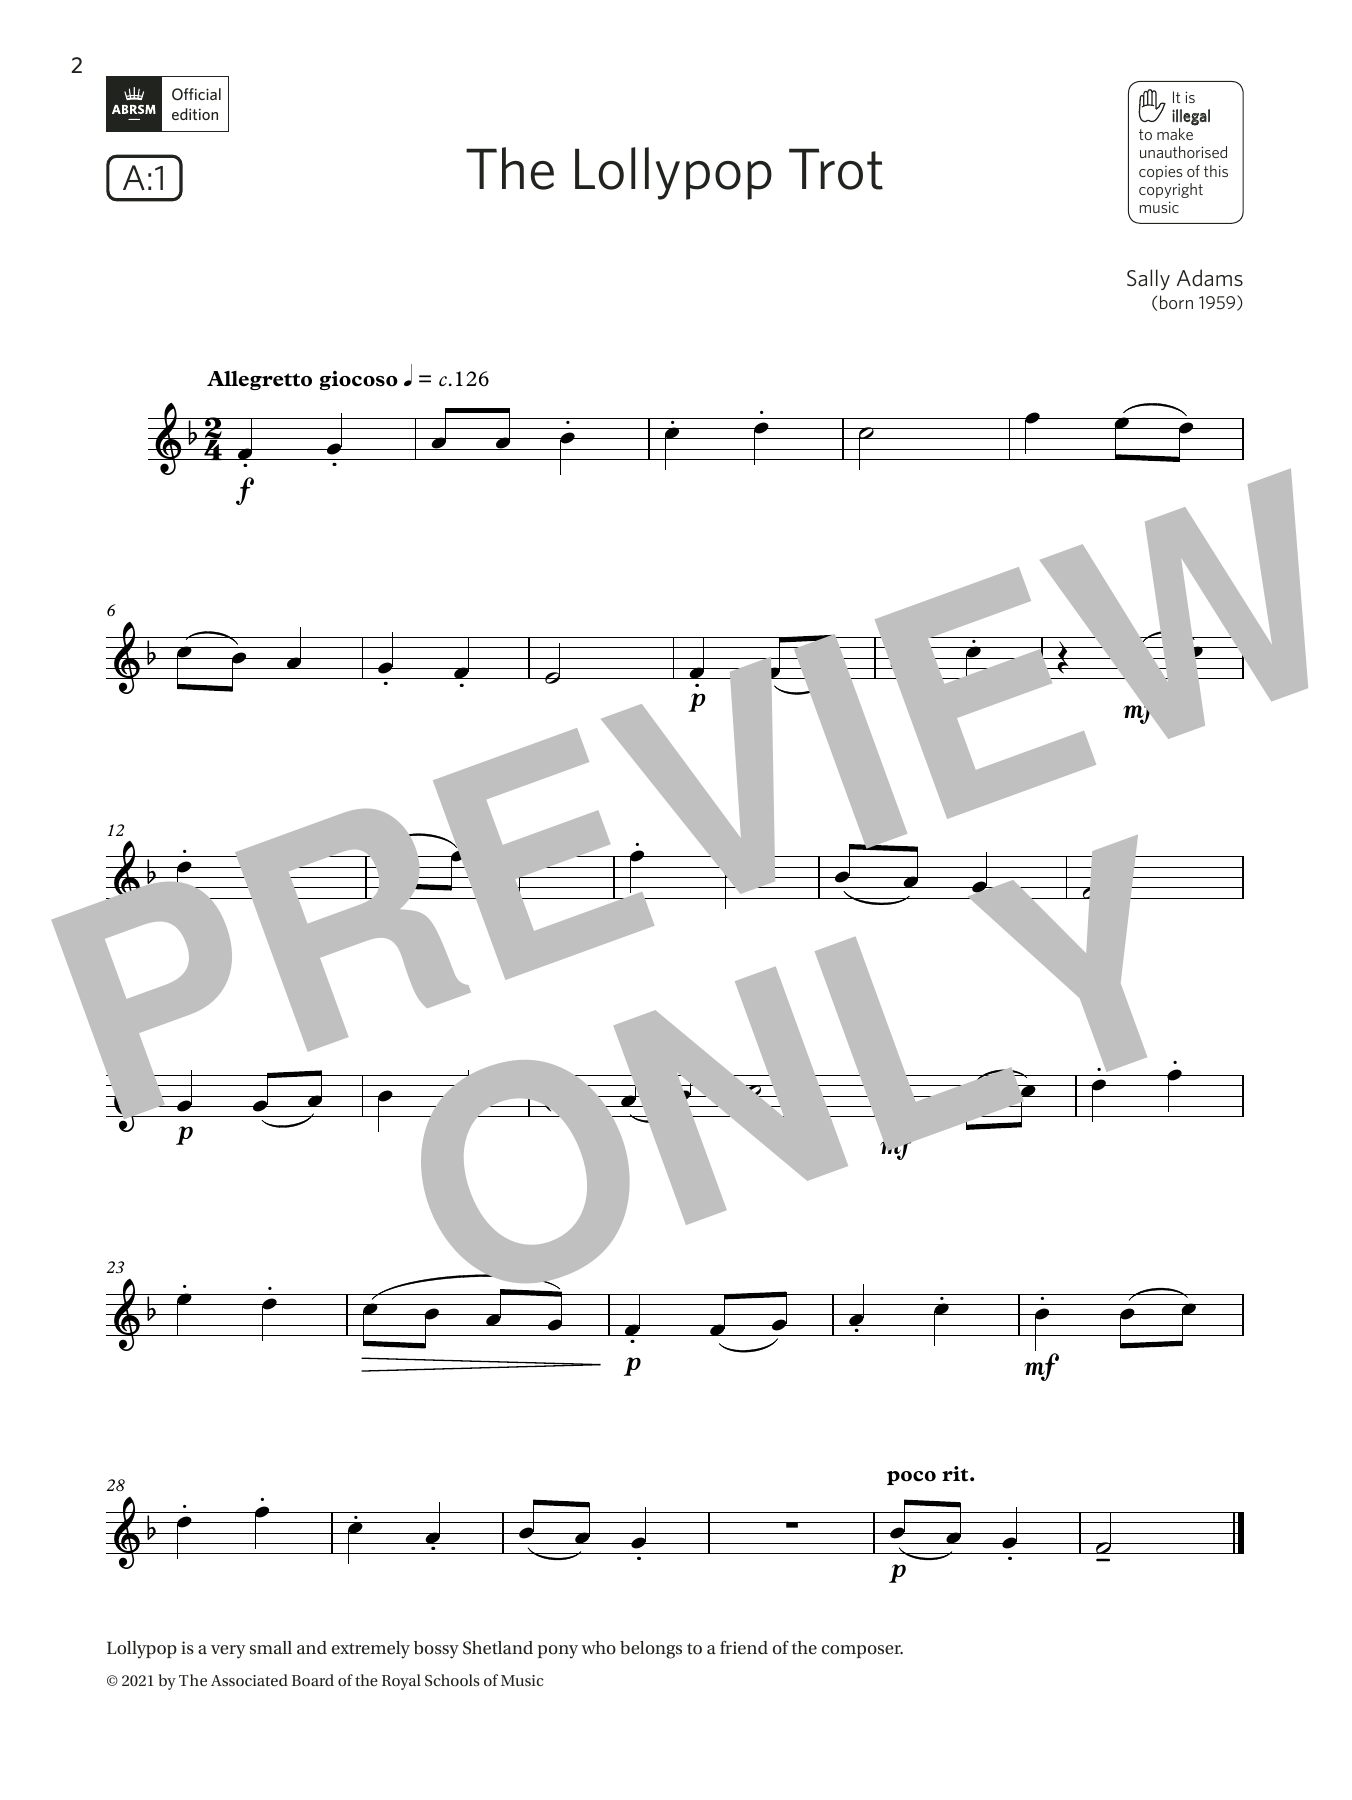 Download Sally Adams The Lollypop Trot (Grade 1 List A1 from Sheet Music